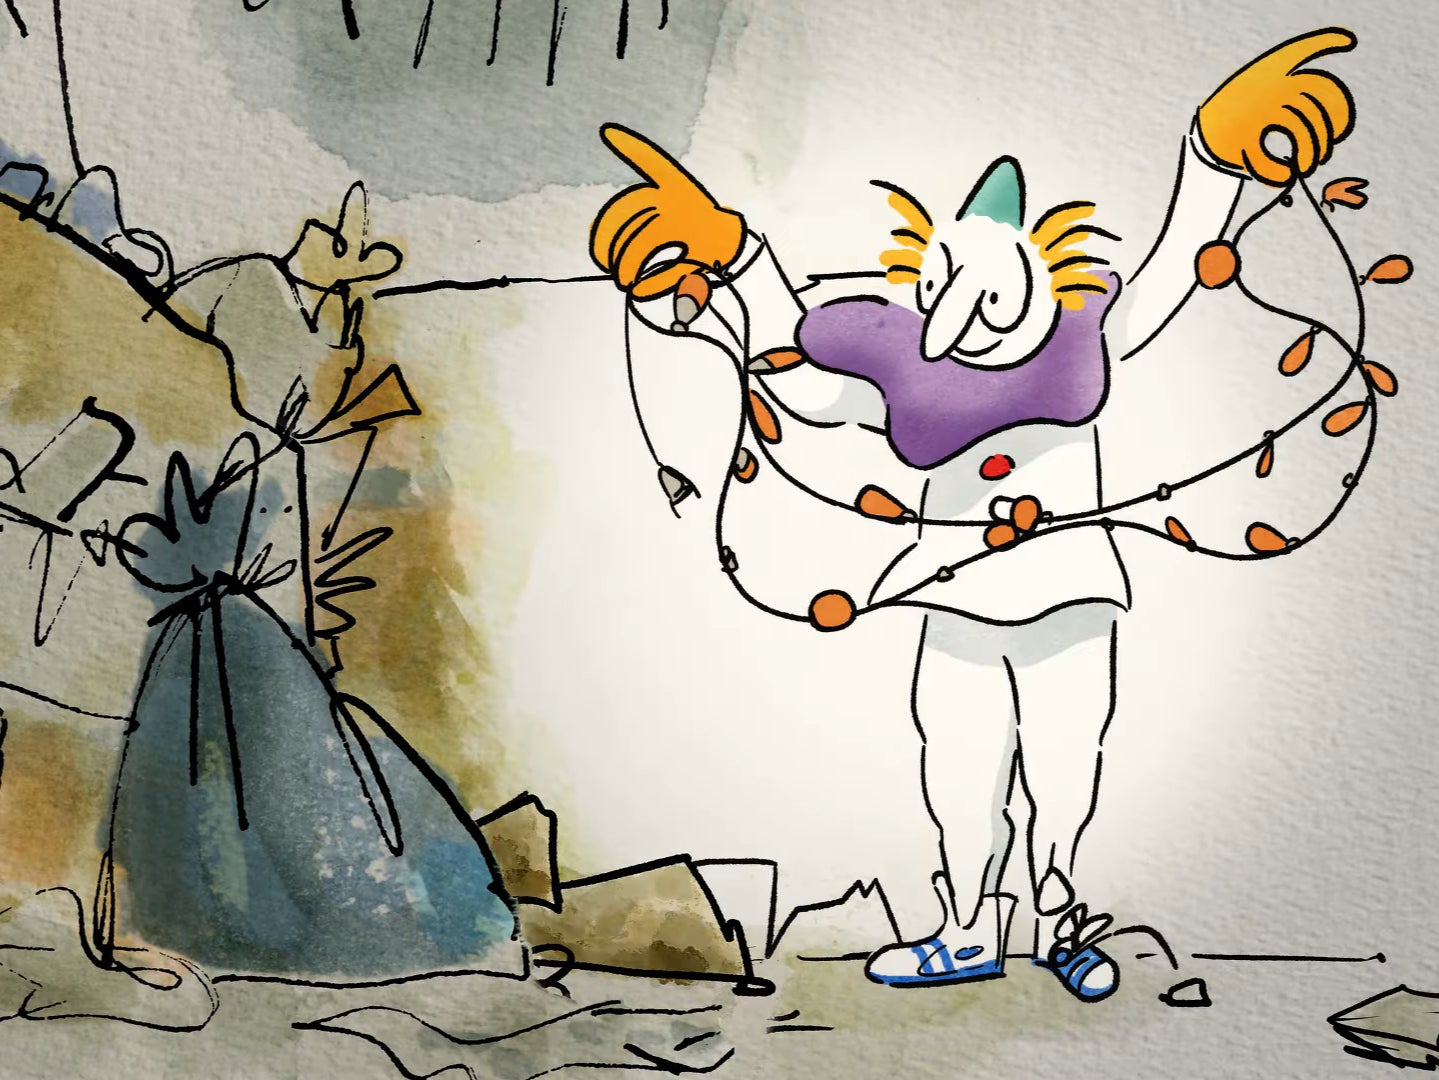 A still from Quentin Blake’s Clown, Channel 4’s new hand-drawn animated special